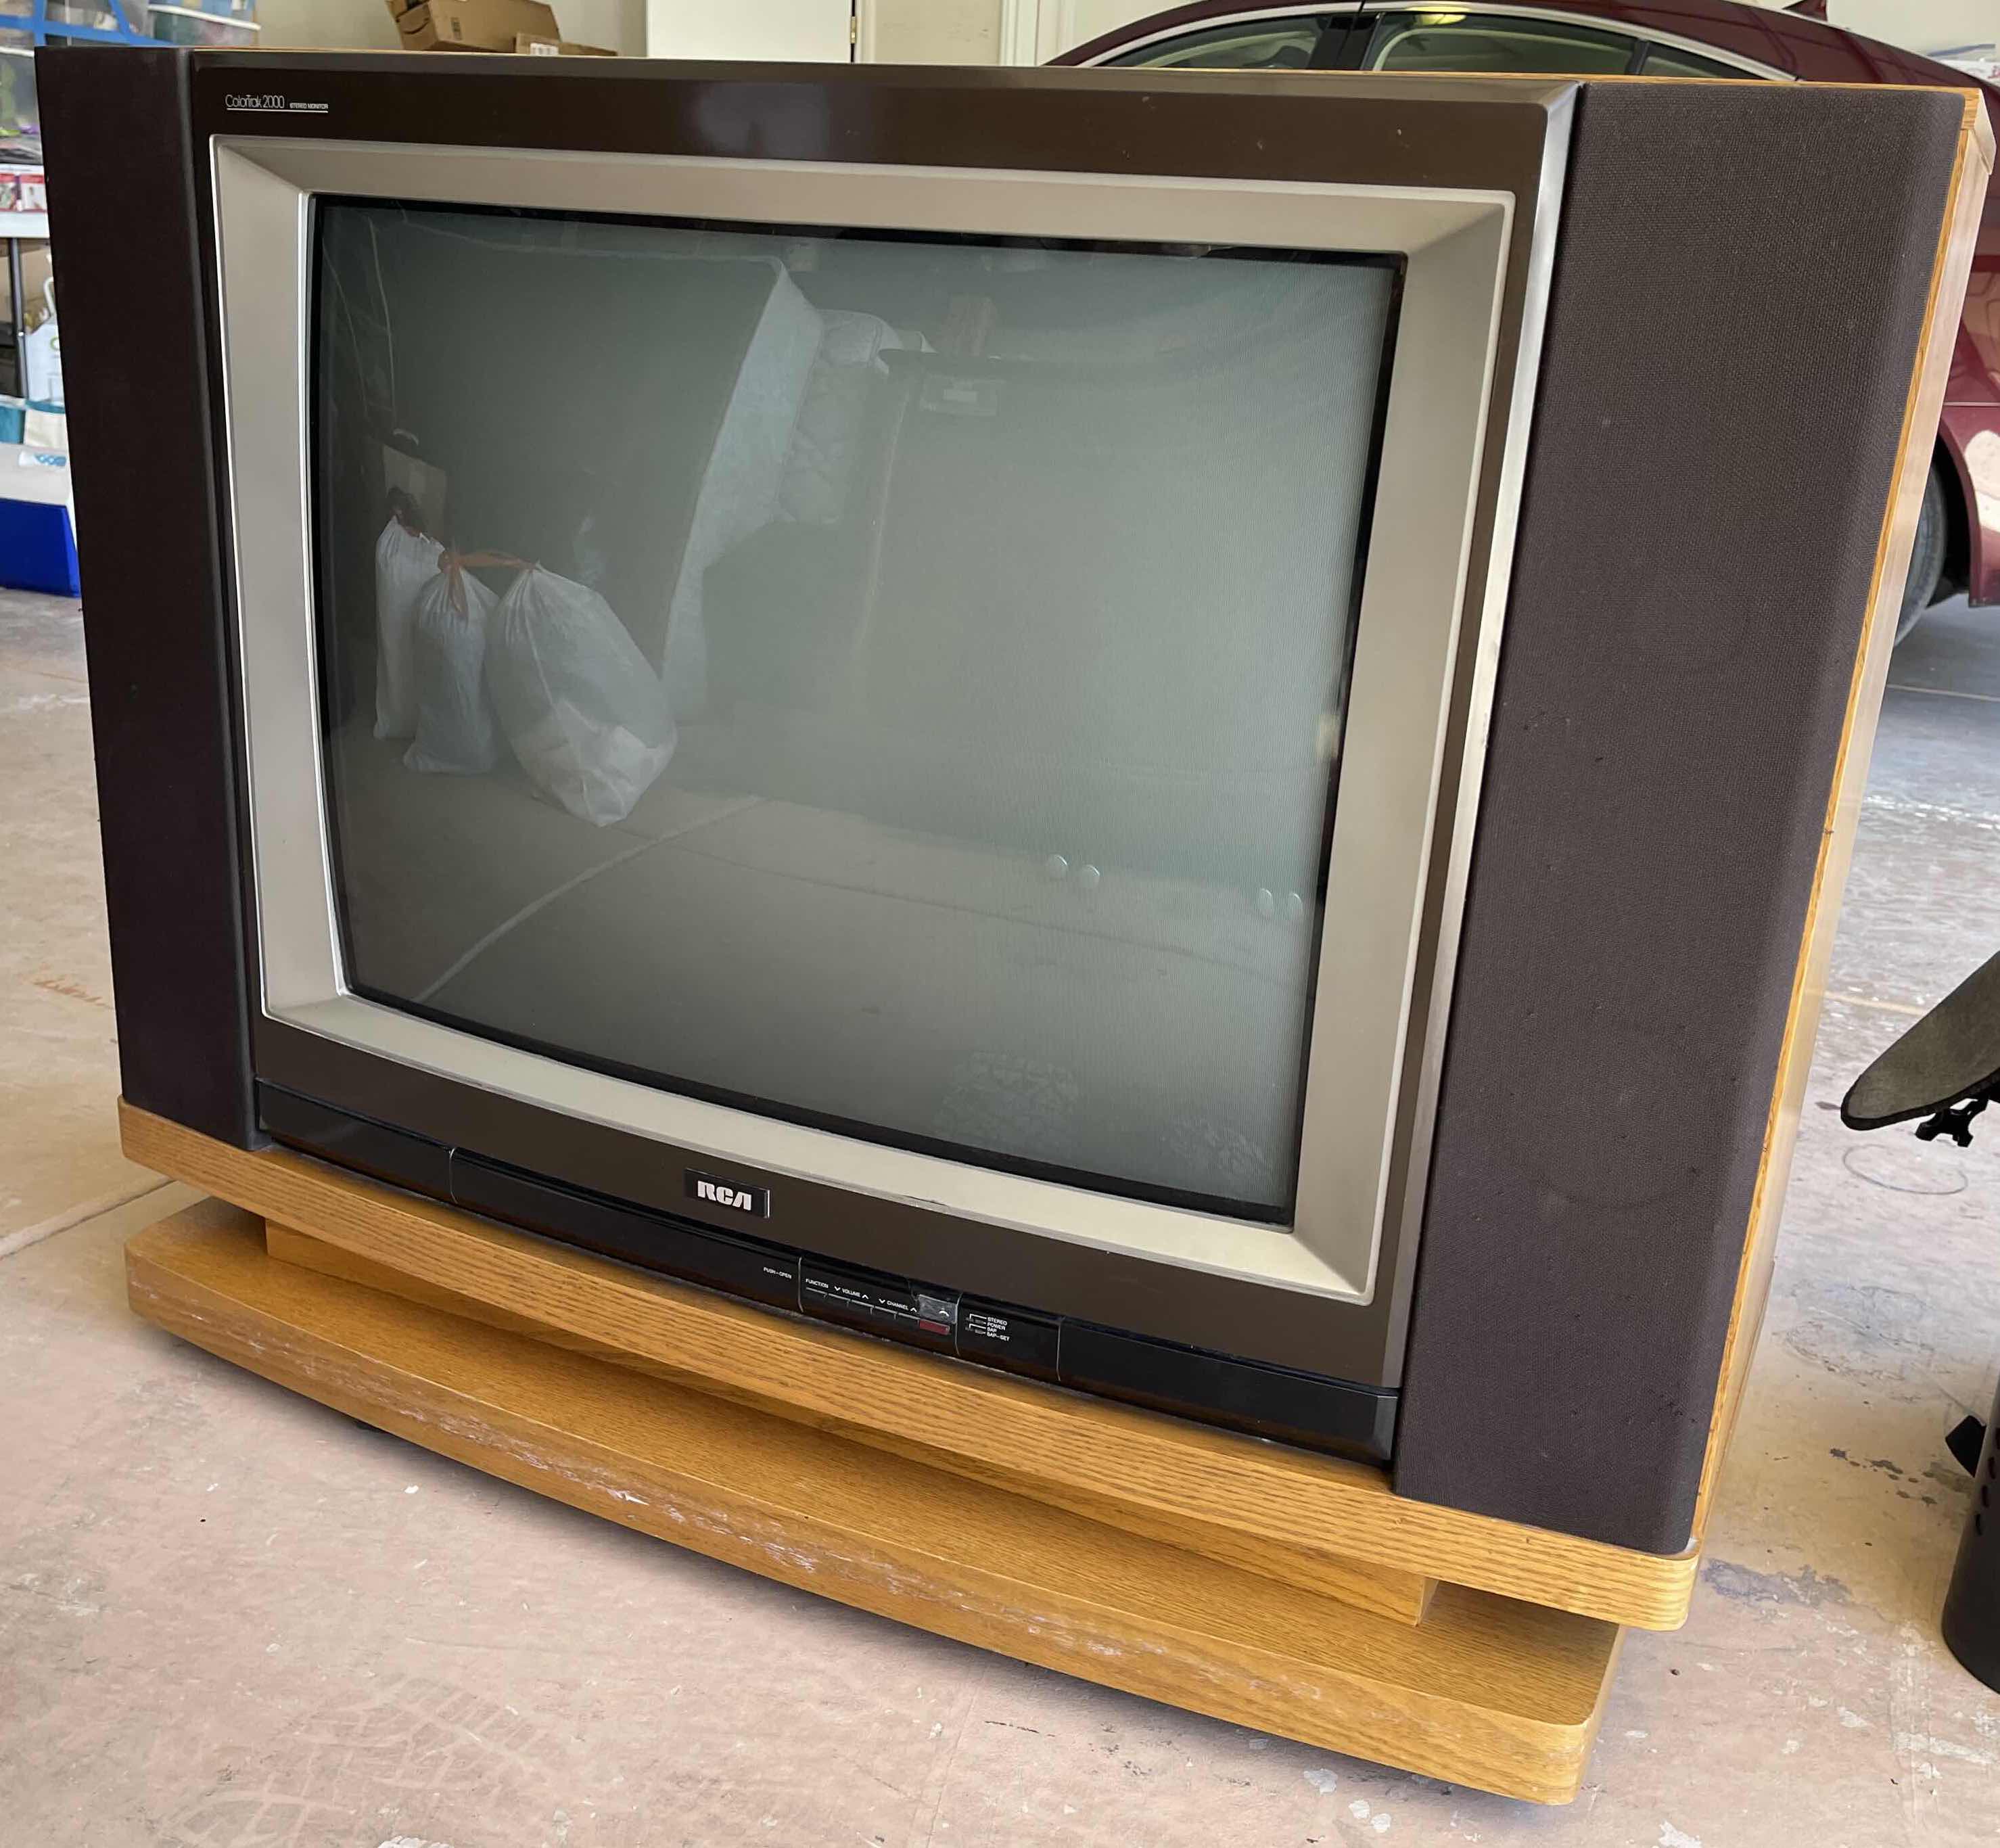 Photo 1 of RCA 32” COLORTRAK 2000 STEREO MONITOR CONSOLE WITH WHEELS, CONSOLE 15” X 42” H35” (MODEL G31150CK)